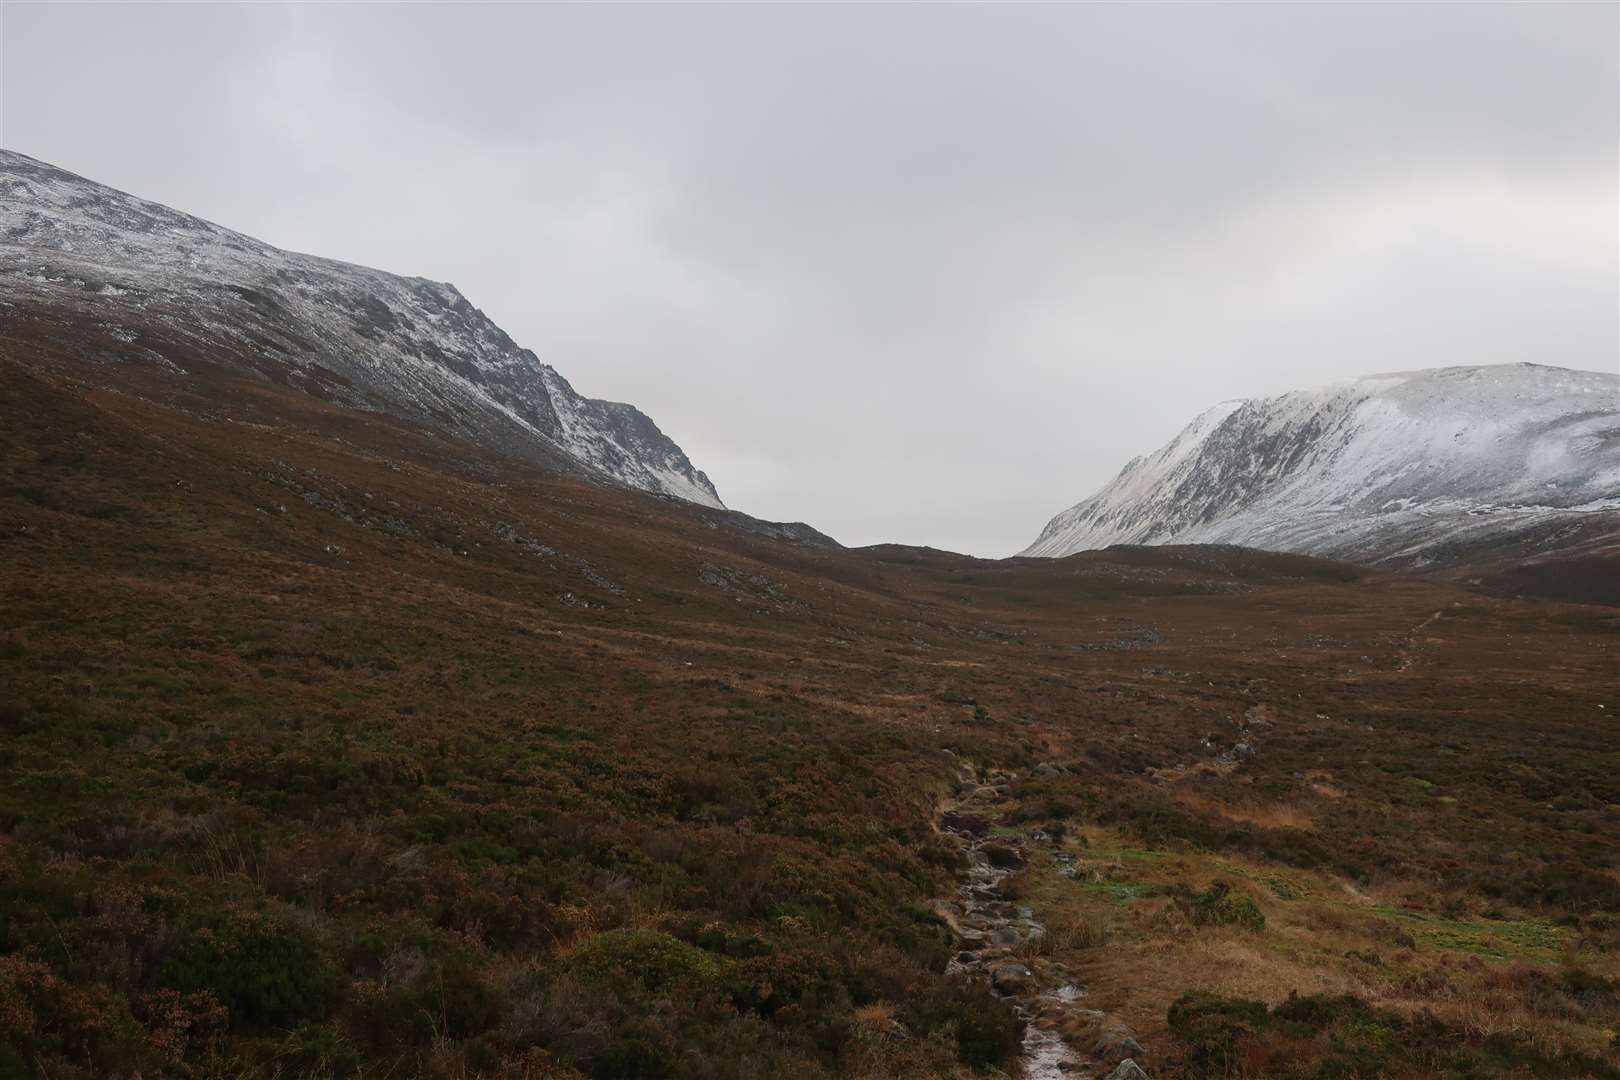 The Lairig Ghru path continues ahead but our route goes left up the heather slopes.